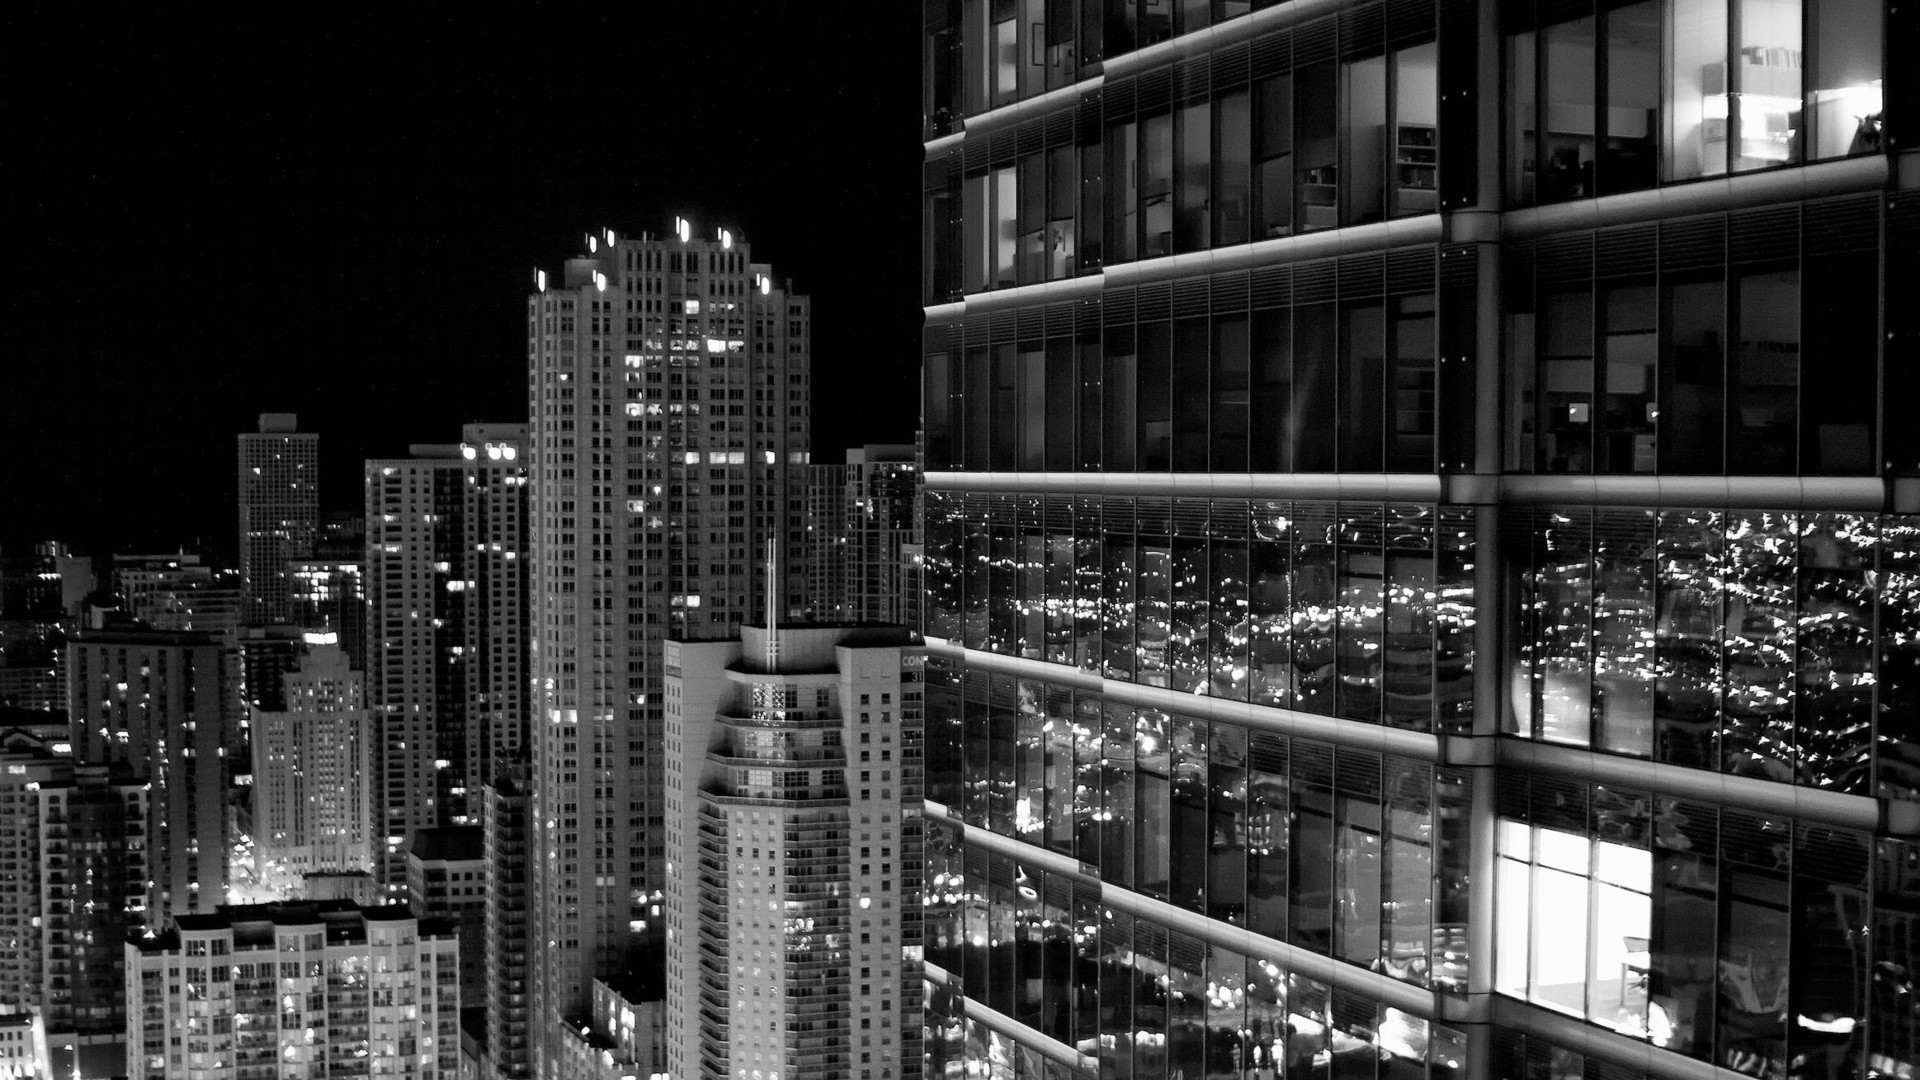 Black and white photo of a city at night - Black and white